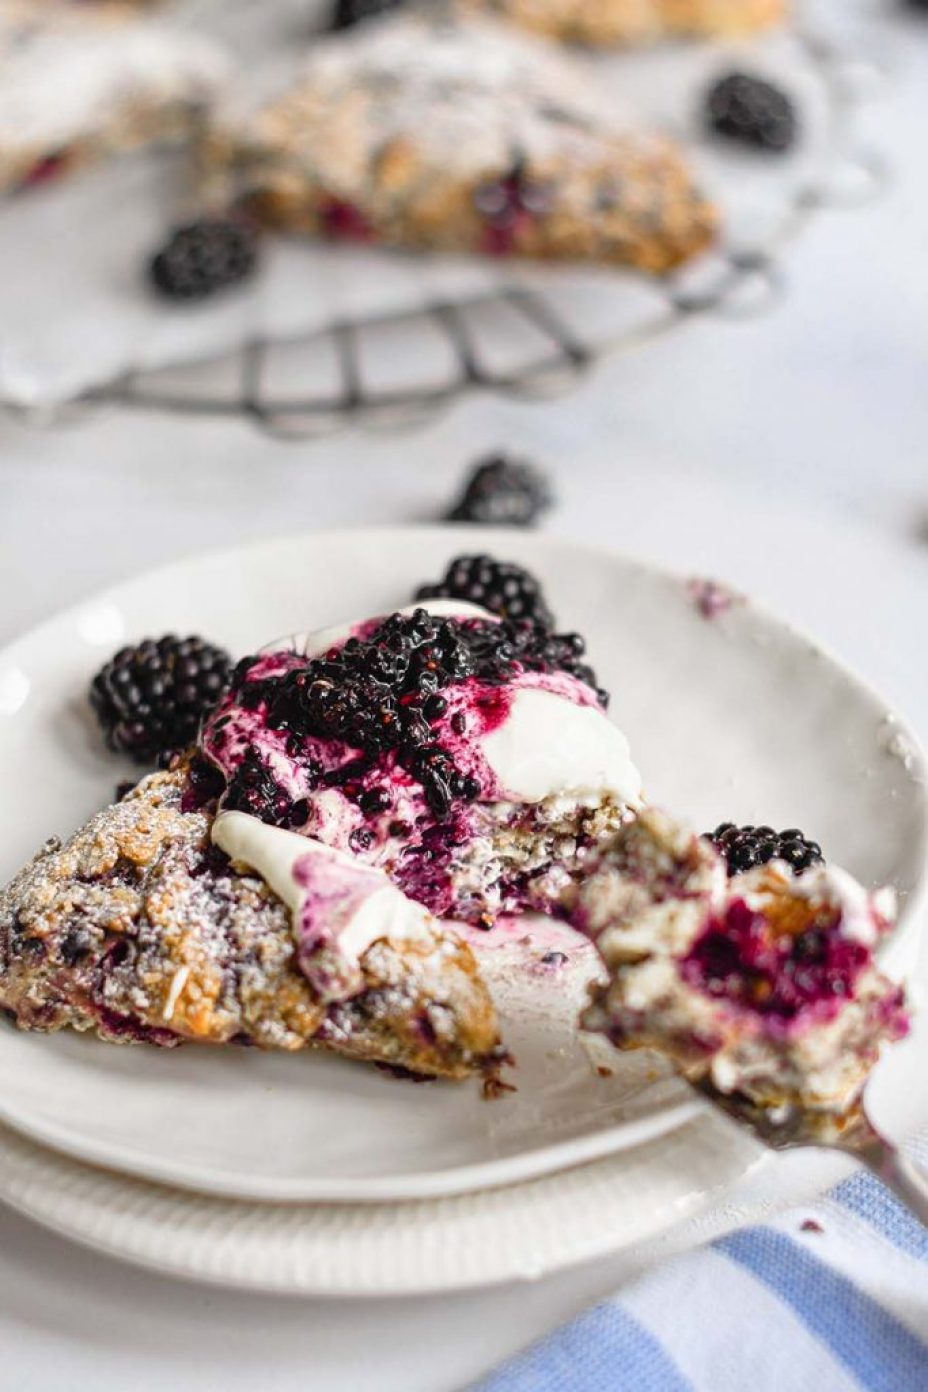 Blackberry scones, perfect for breakfast or a teatime treat